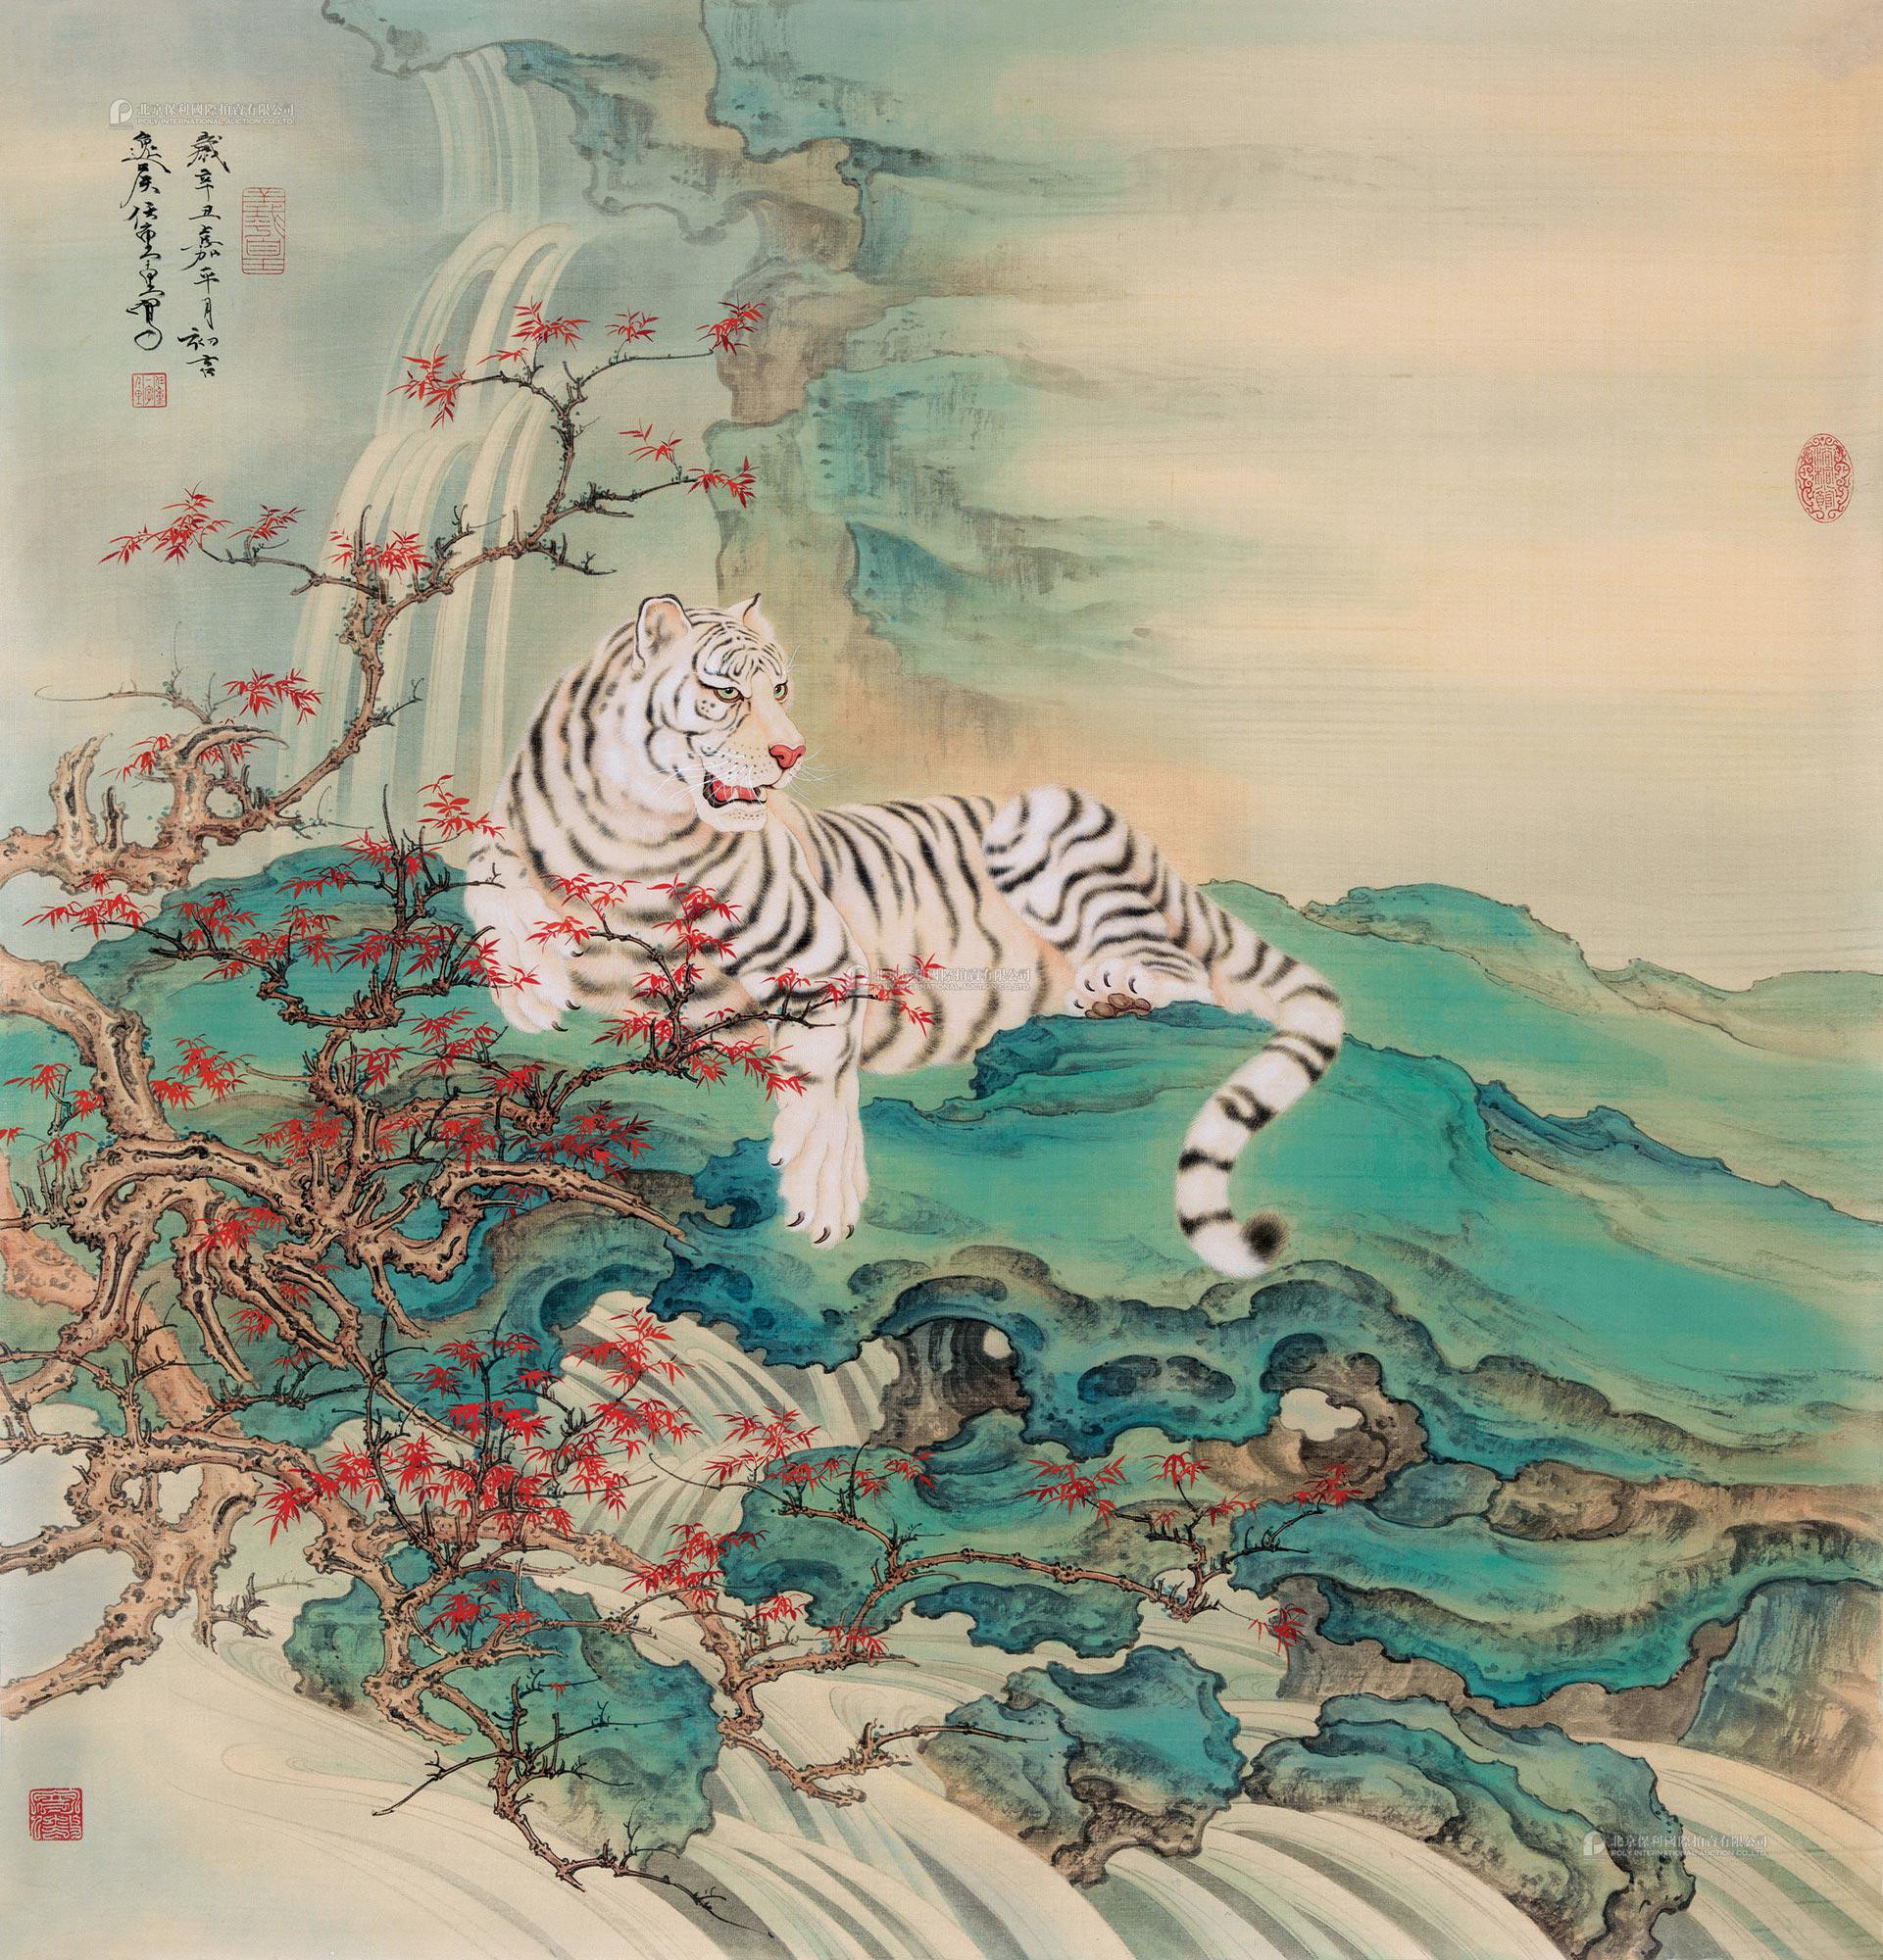 TIGER AND MOUNTAIN